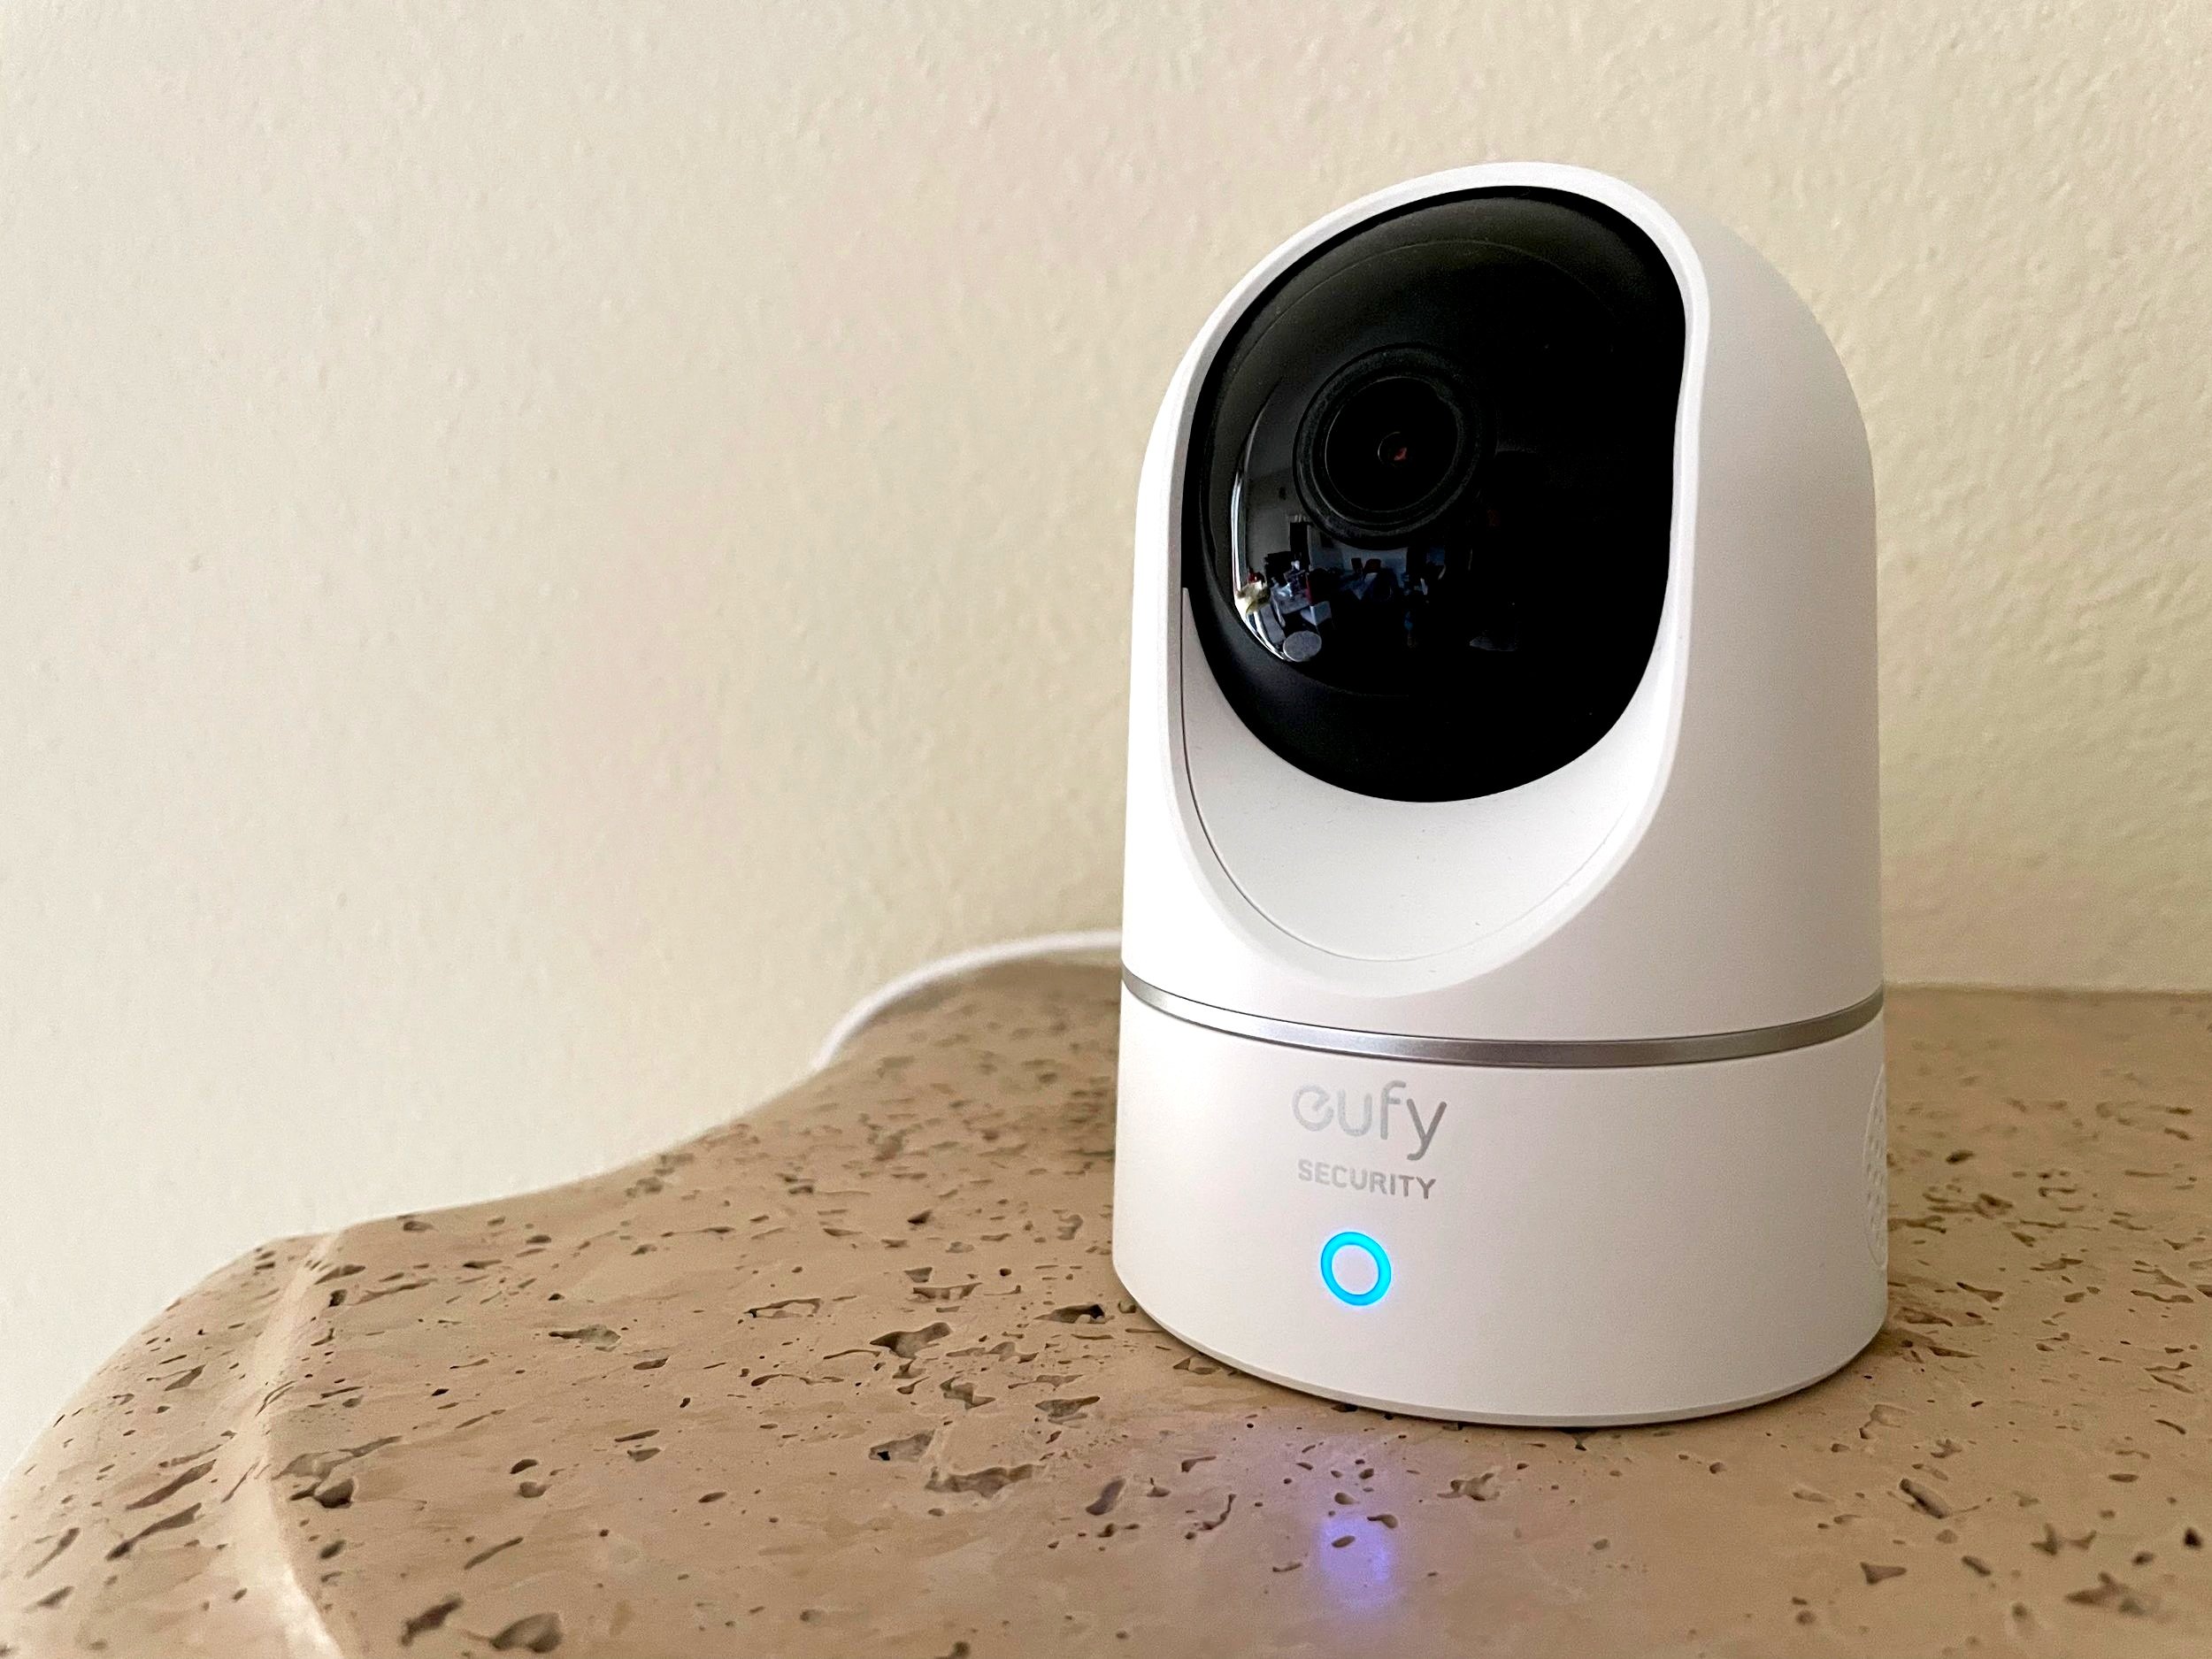 Eufy security cameras suddenly start showing live feeds to